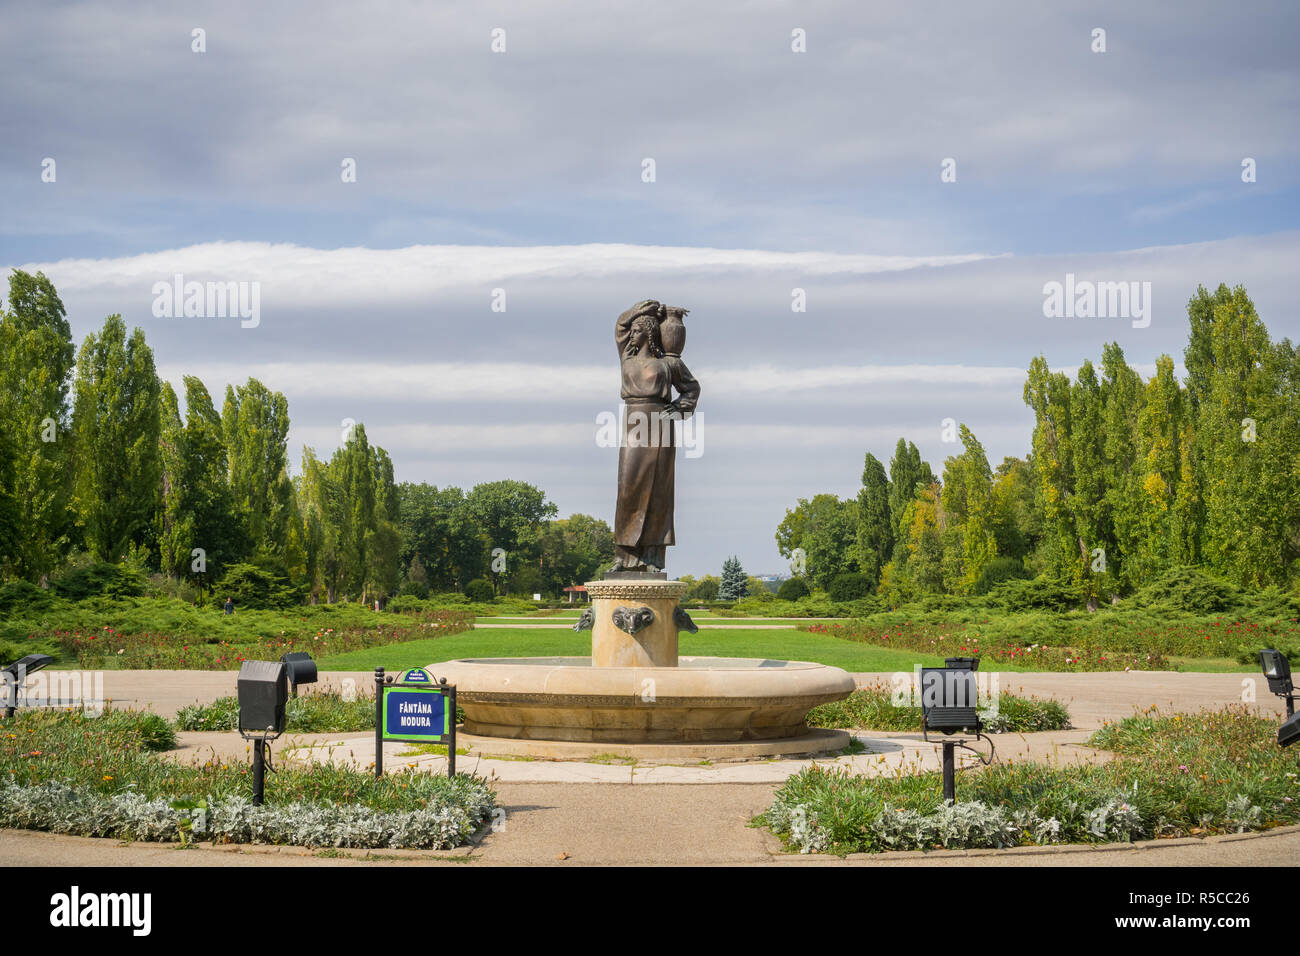 Statue at one of the entrances in Herastrau park, Bucharest, Romania Stock Photo